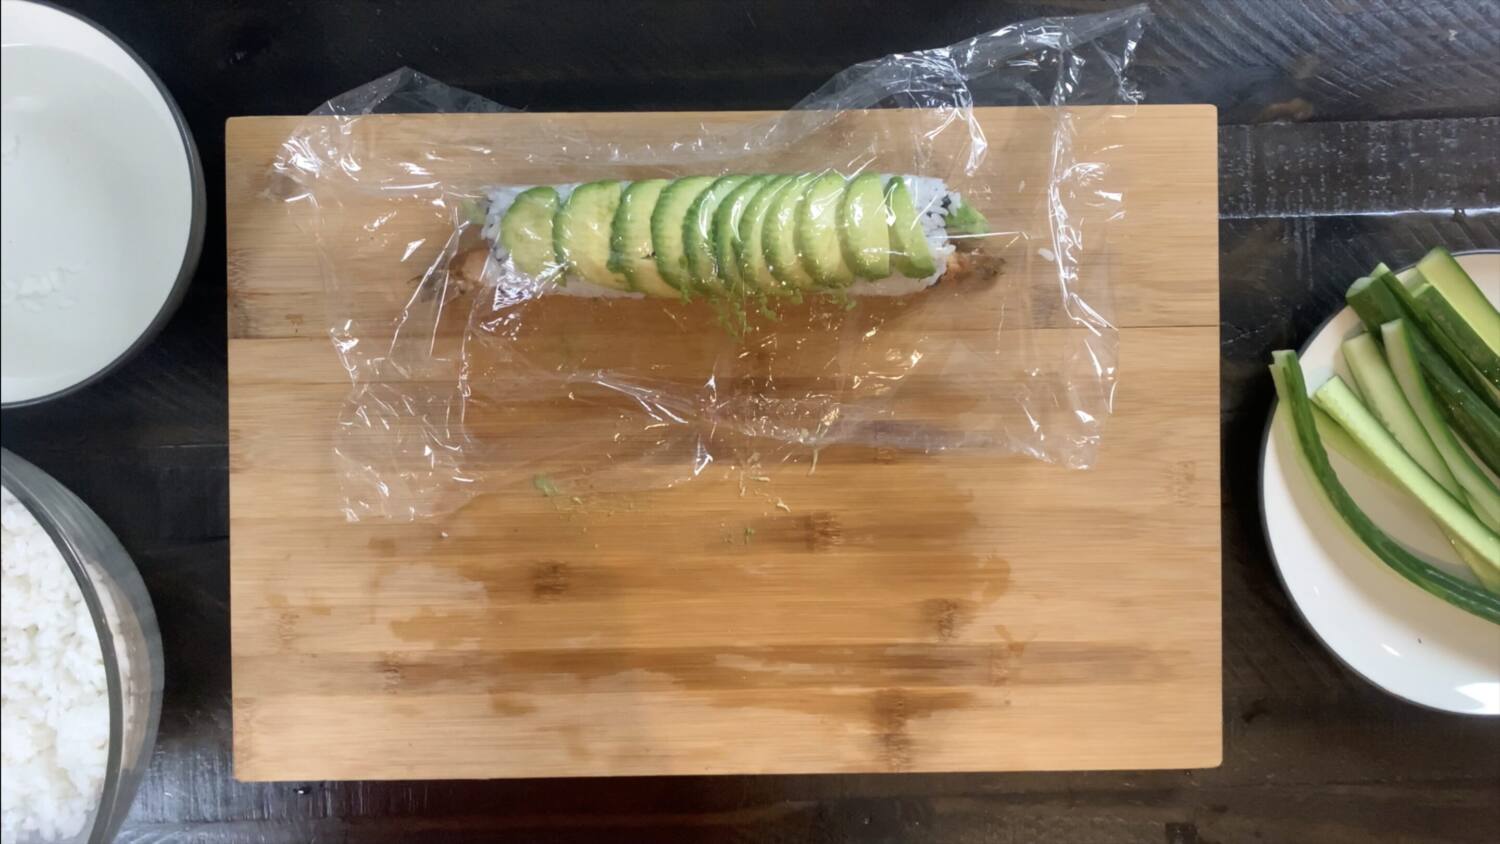 Place plastic wrap over avocado to make cutting the dragon roll easier